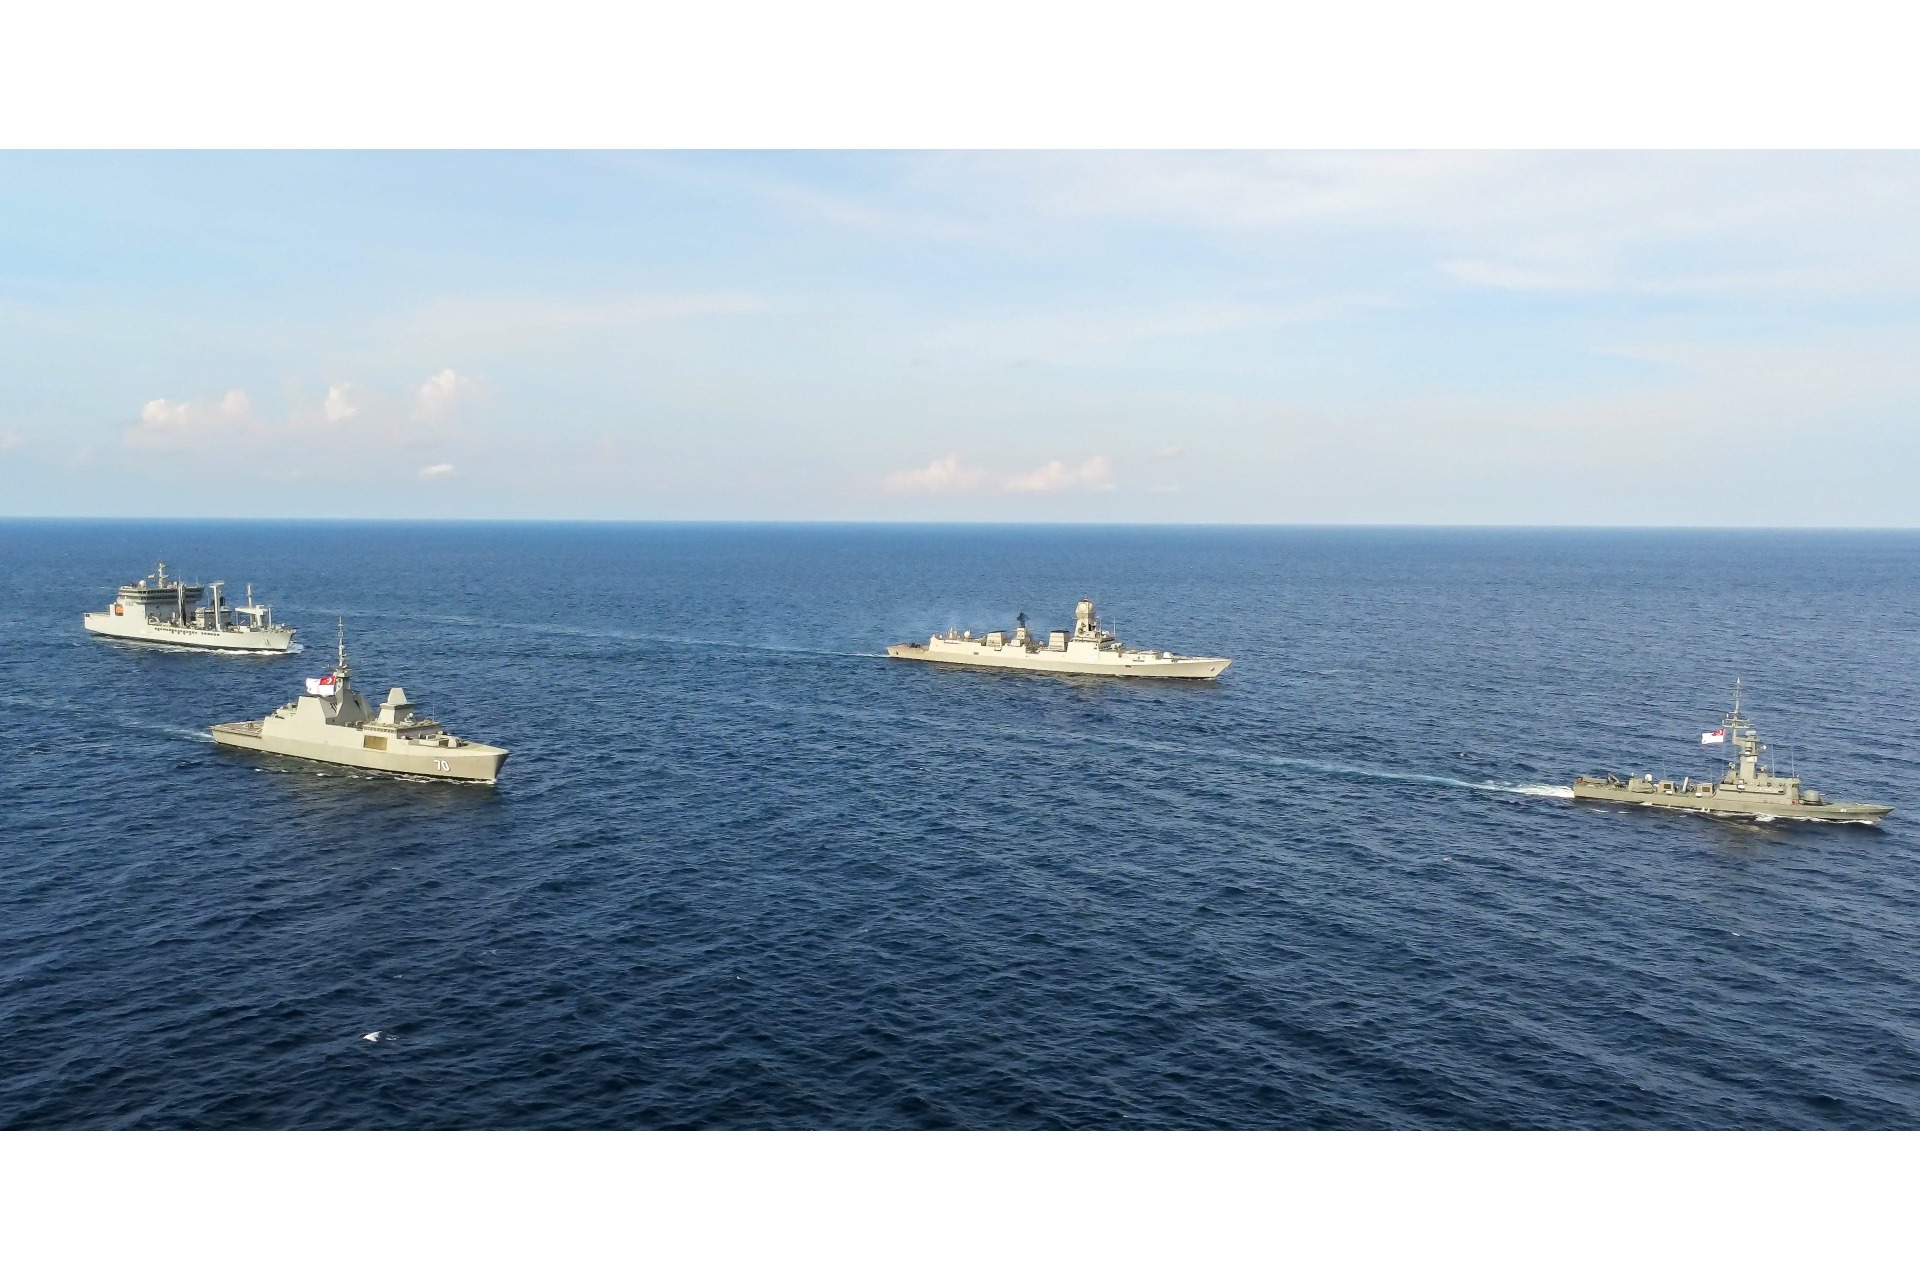 The Republic of Singapore Navy (RSN)’s missile corvette RSS Valiant and frigate RSS Steadfast sailing in formation with the Indian Navy (IN)’s destroyer INS Kolkata and oiler INS Shakti at the Singapore-India Maritime Bilateral Exercise.